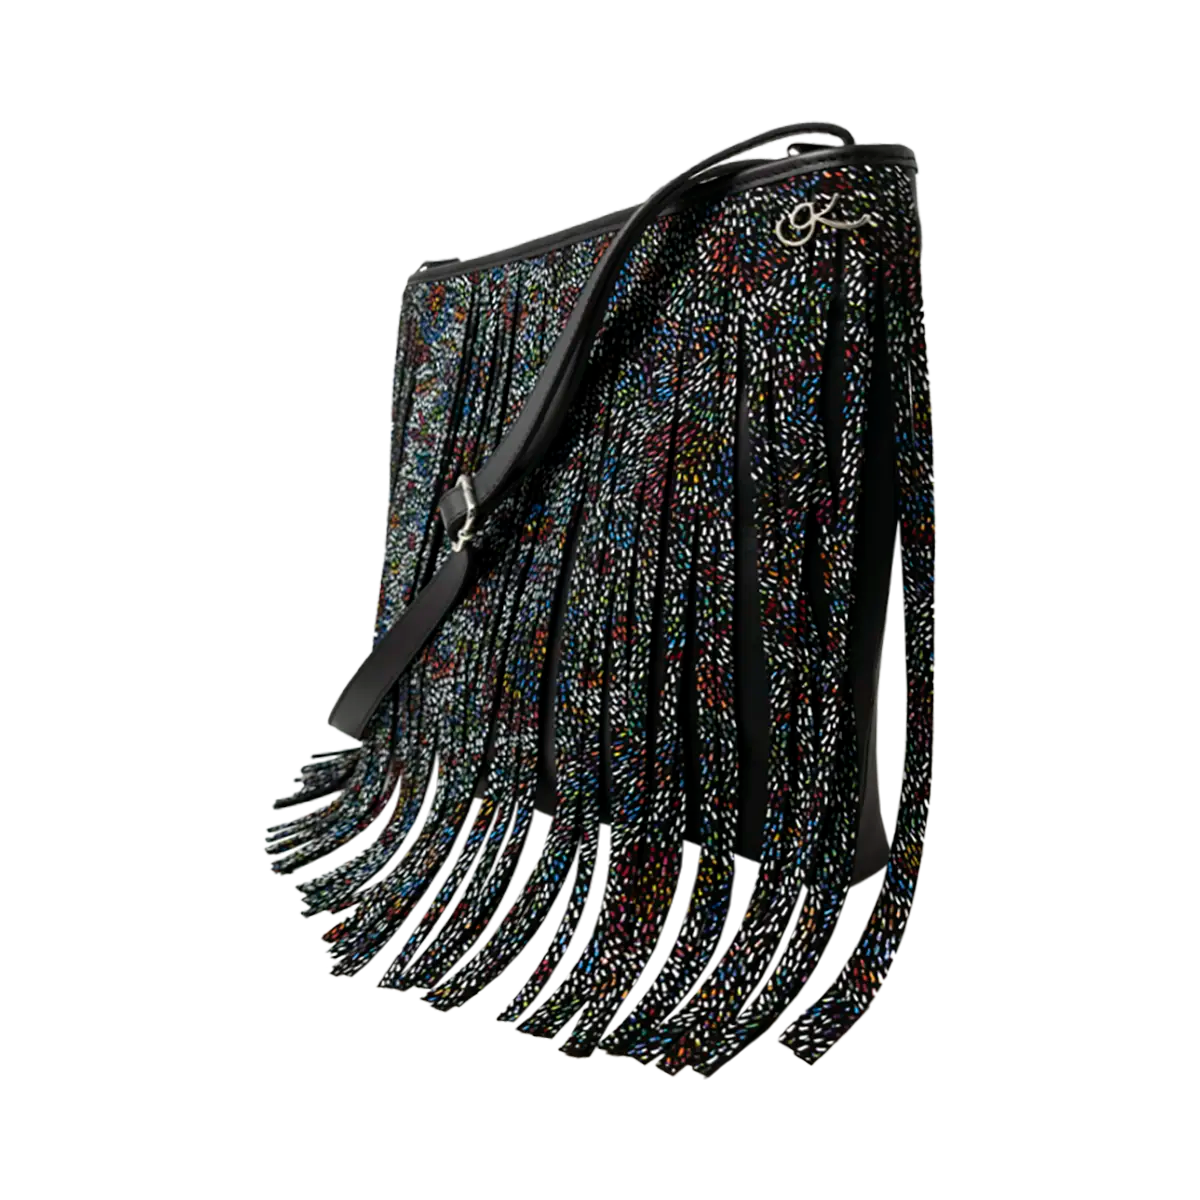 large black multi stripe leather crossbody bag with fringe. Fashion accessory for women in San Diego, CA.